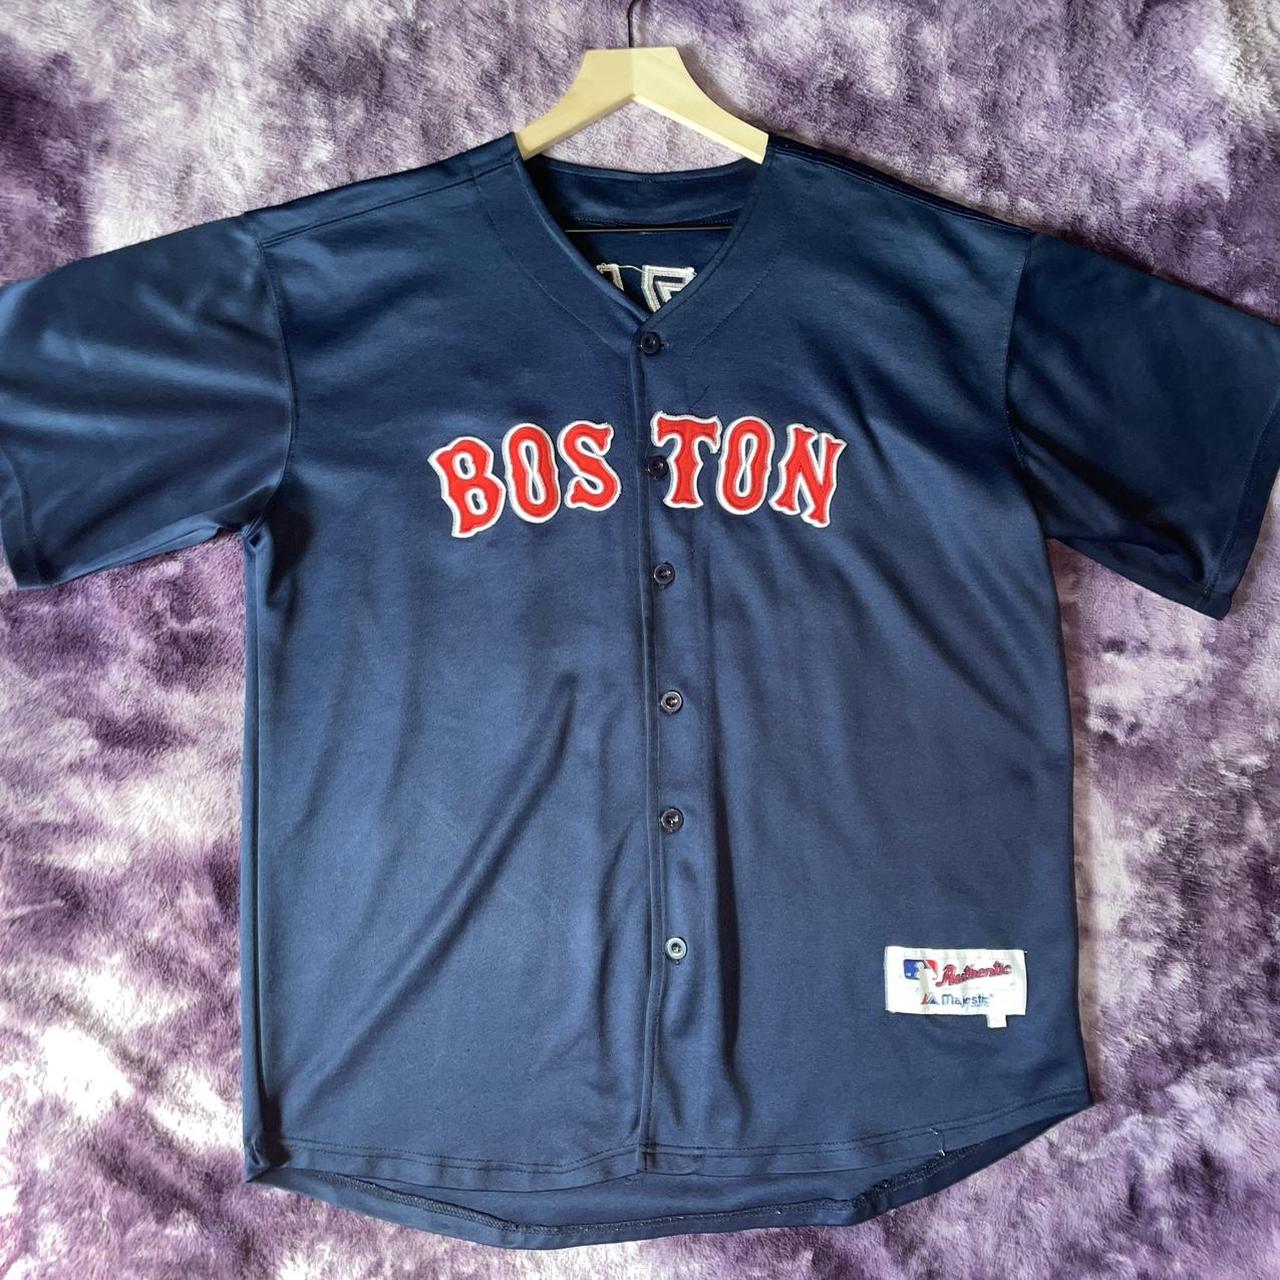 red sox 28 jersey